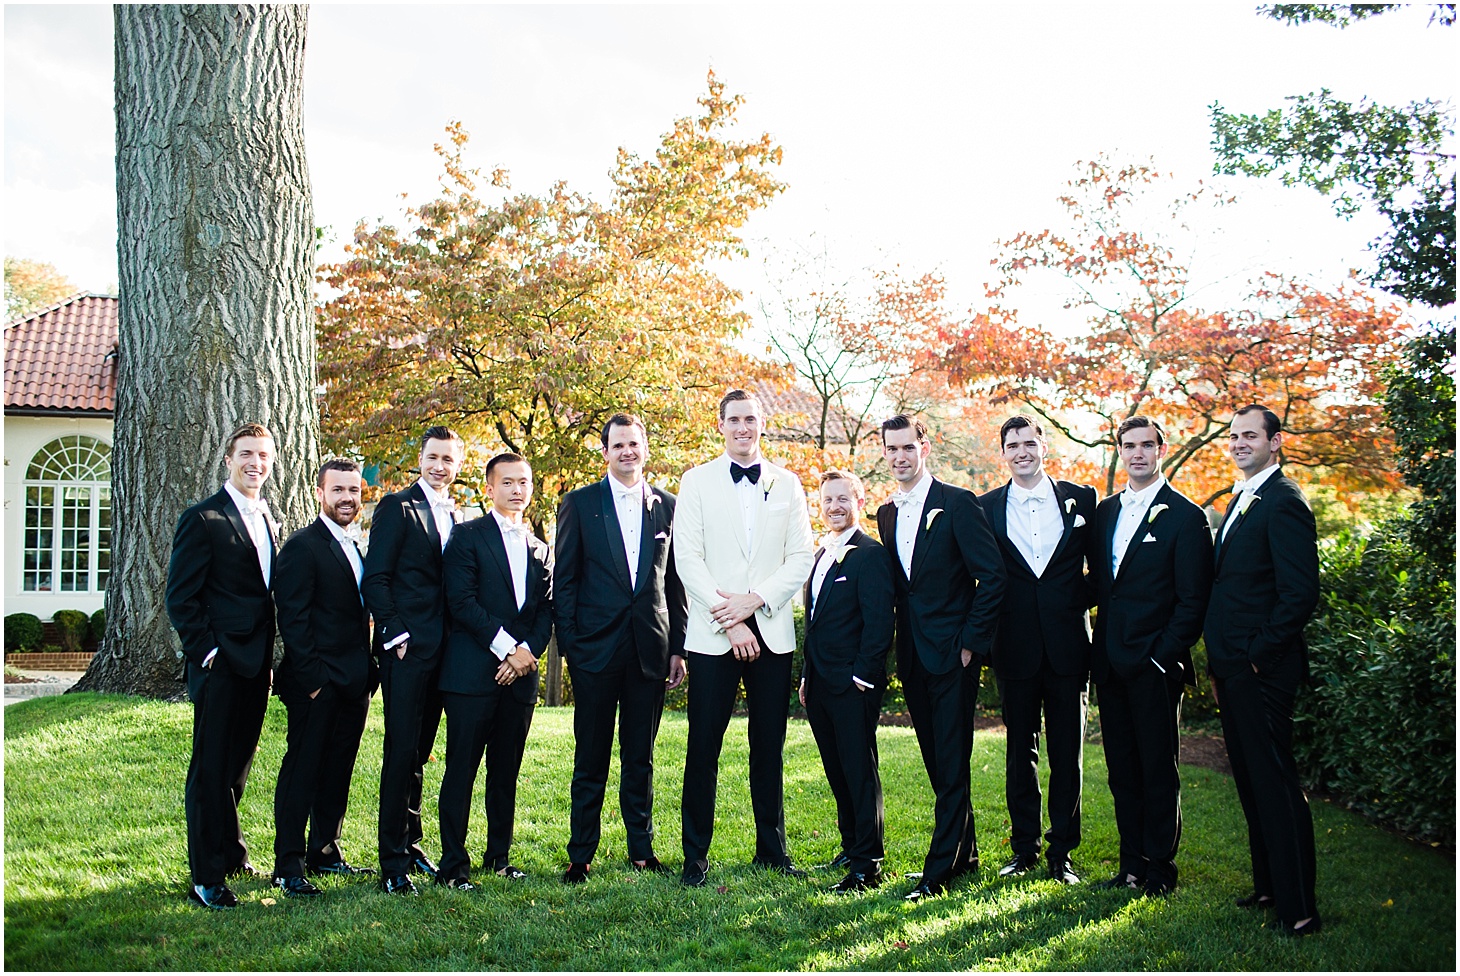 Groom and Groomsmen Portraits at Columbia Country Club | Wedding Ceremony at Cathedral of St. Matthew the Apostle | Classy October Wedding in Washington, D.C. | Sarah Bradshaw Photography